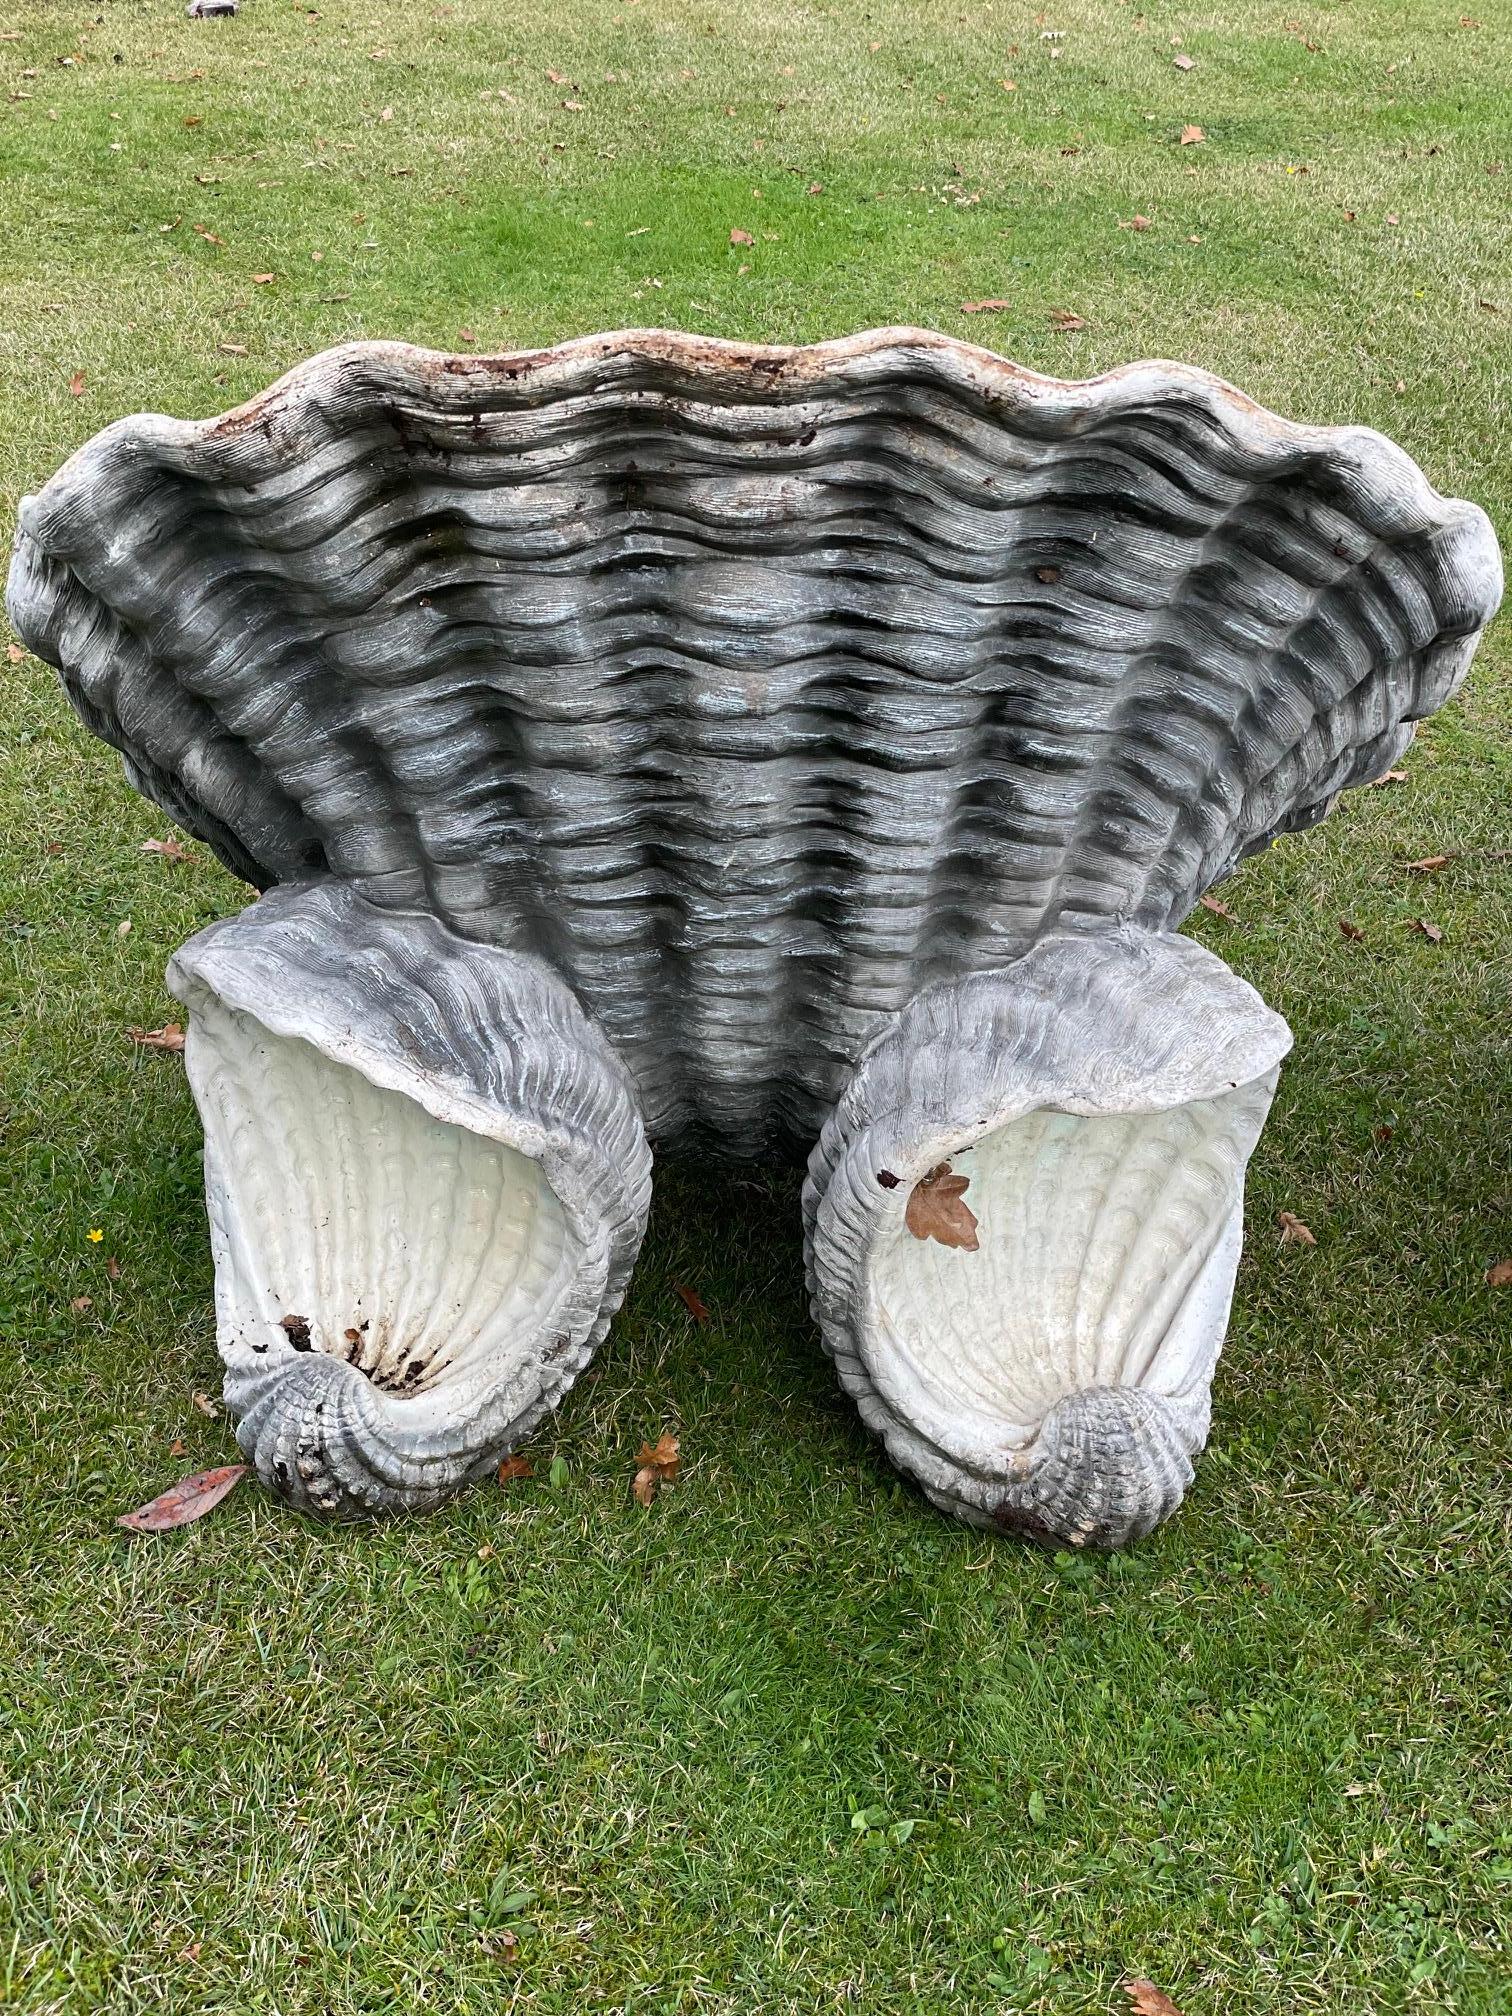 Unusual and rare shell Grotto Garden chairs, 20th century.

It has taken us a long time to source 2 pairs of these very rare garden composite Shell Grotto garden chairs. 

These chairs really stand out and make a statement with its unique form